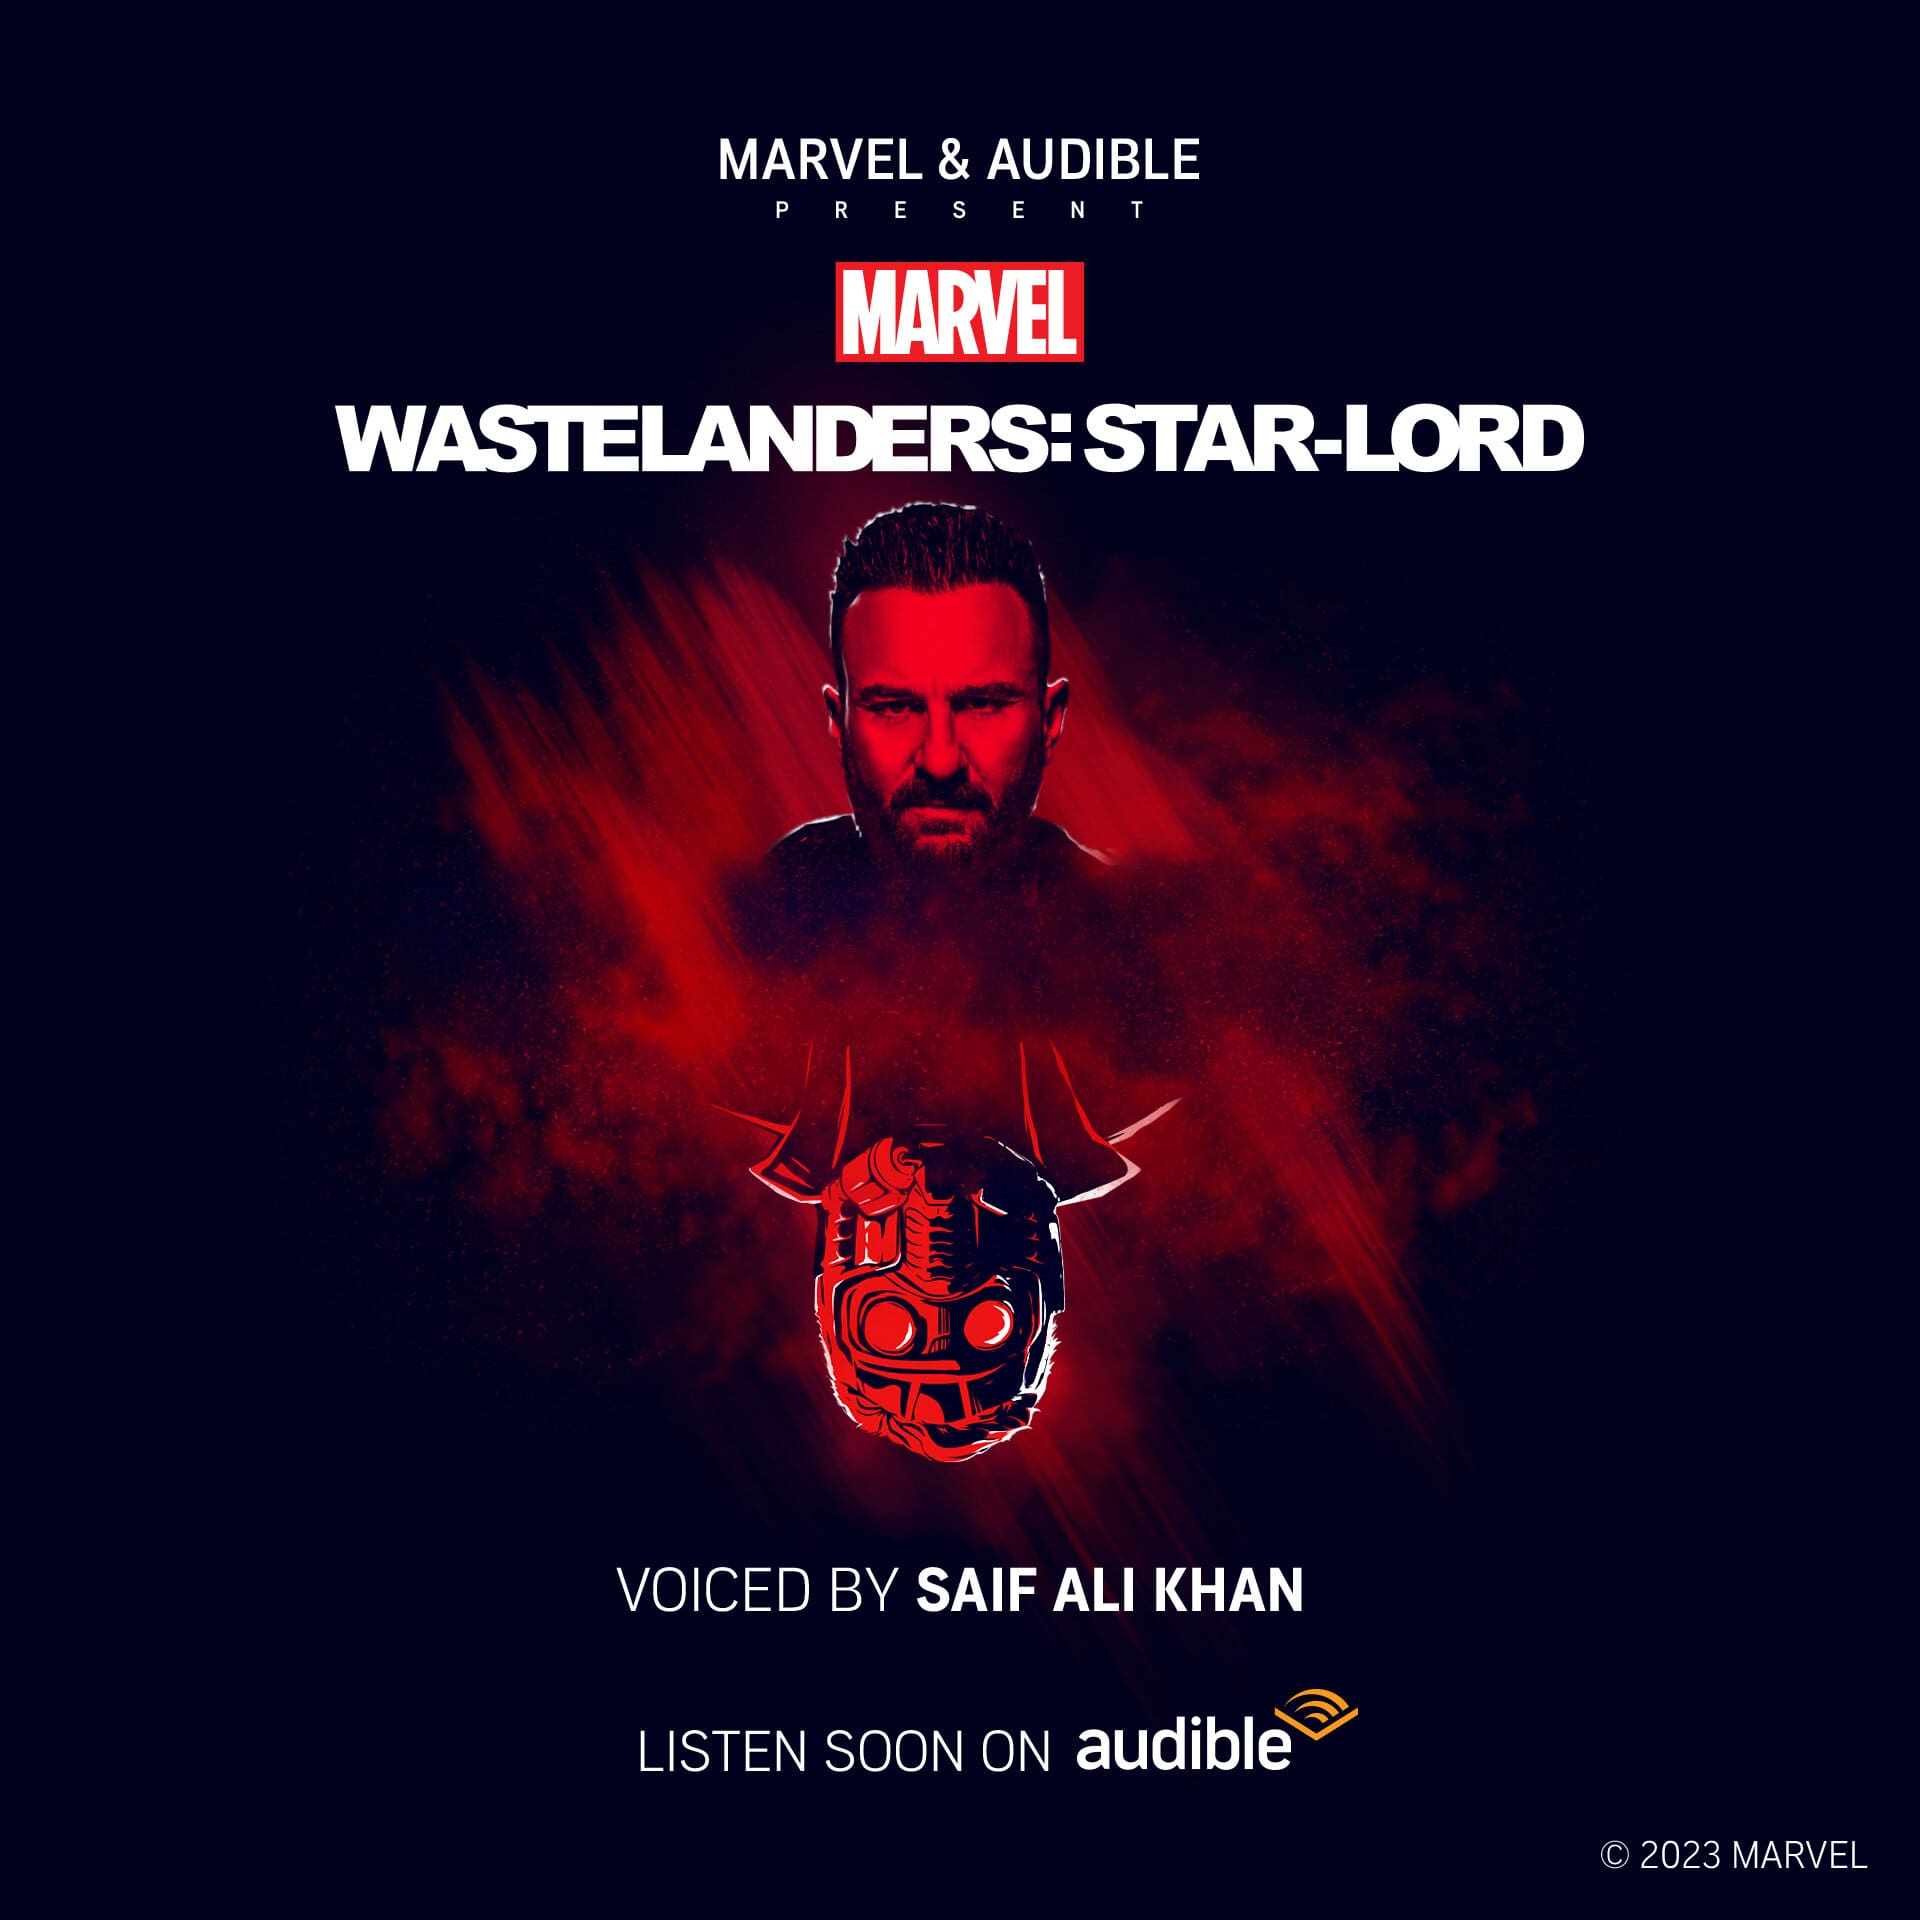 Supari Studios and Post Office Studios combine forces to build a global creative campaign for Audible’s new original series: Marvel’s Wastelanders-thumnail